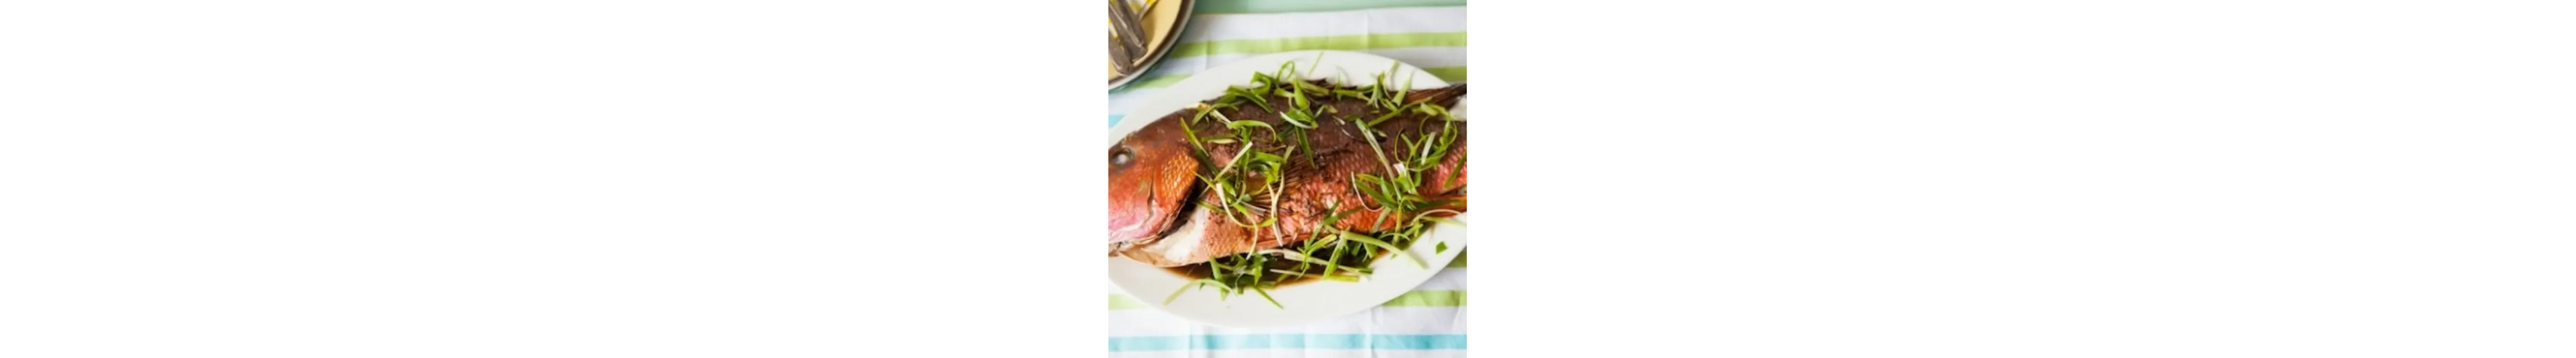 Whole roasted fish on a plate